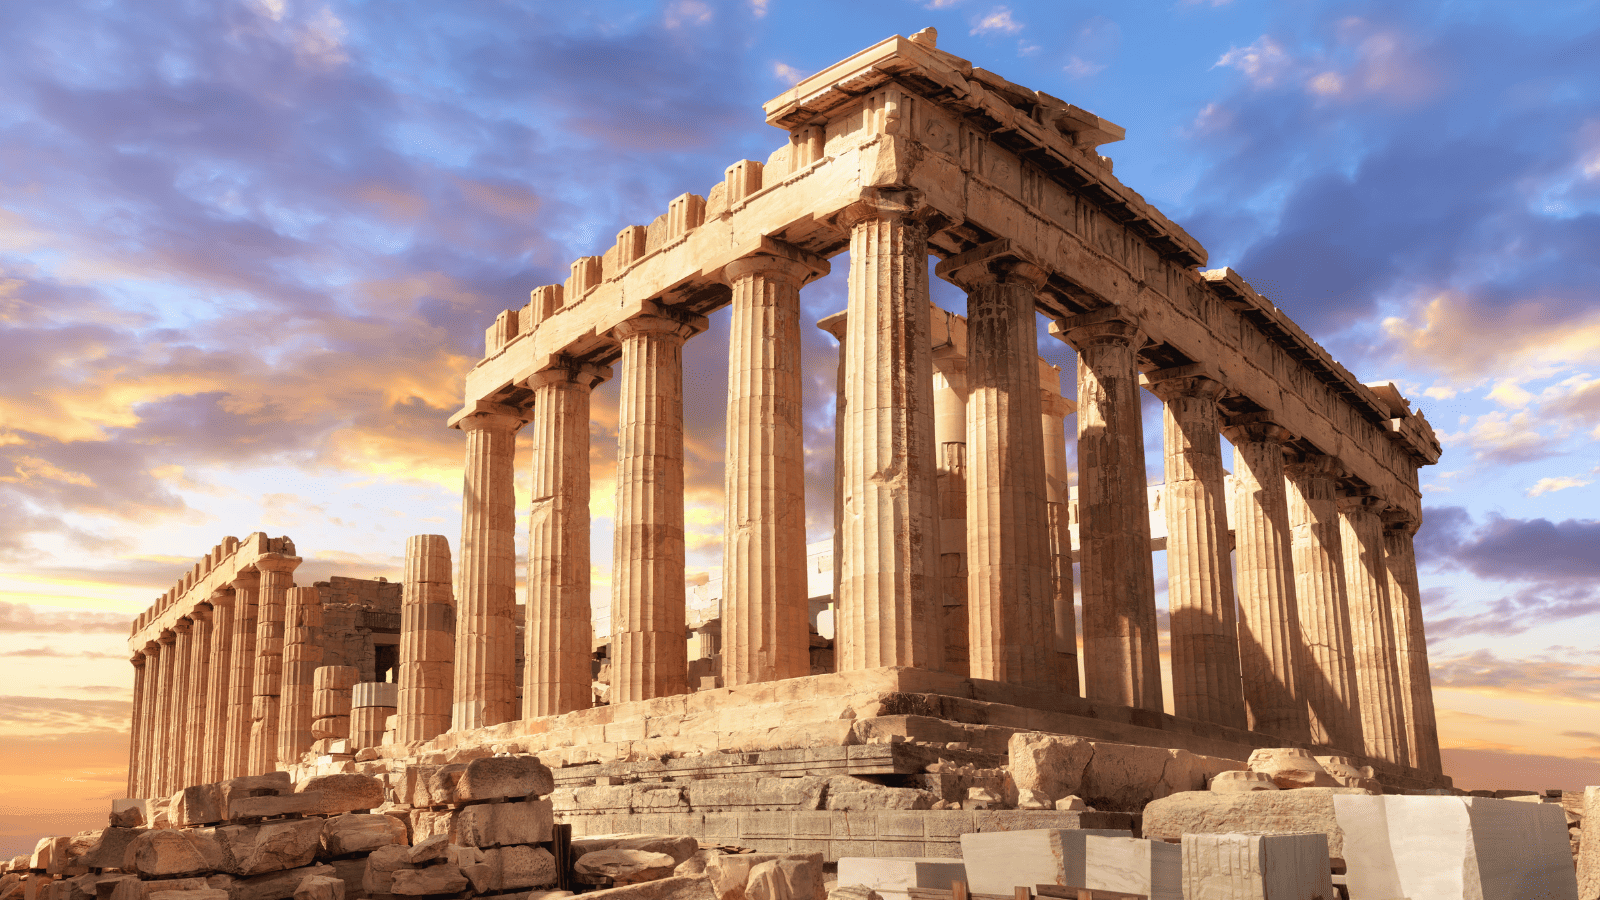 <p>This ancient Greek temple stands atop the Acropolis in Greece’s capital, Athens, and is dedicated to the goddess Athena, after whom the city is <a href="https://www.archaeology.org/issues/380-2005/digs/8615-digs-greece-parthenon-name">named</a>. Constructed in the 5th century BC, its Doric columns, classical architecture, and impressive size symbolize the artistry, wealth, and skill of ancient Greece.</p>